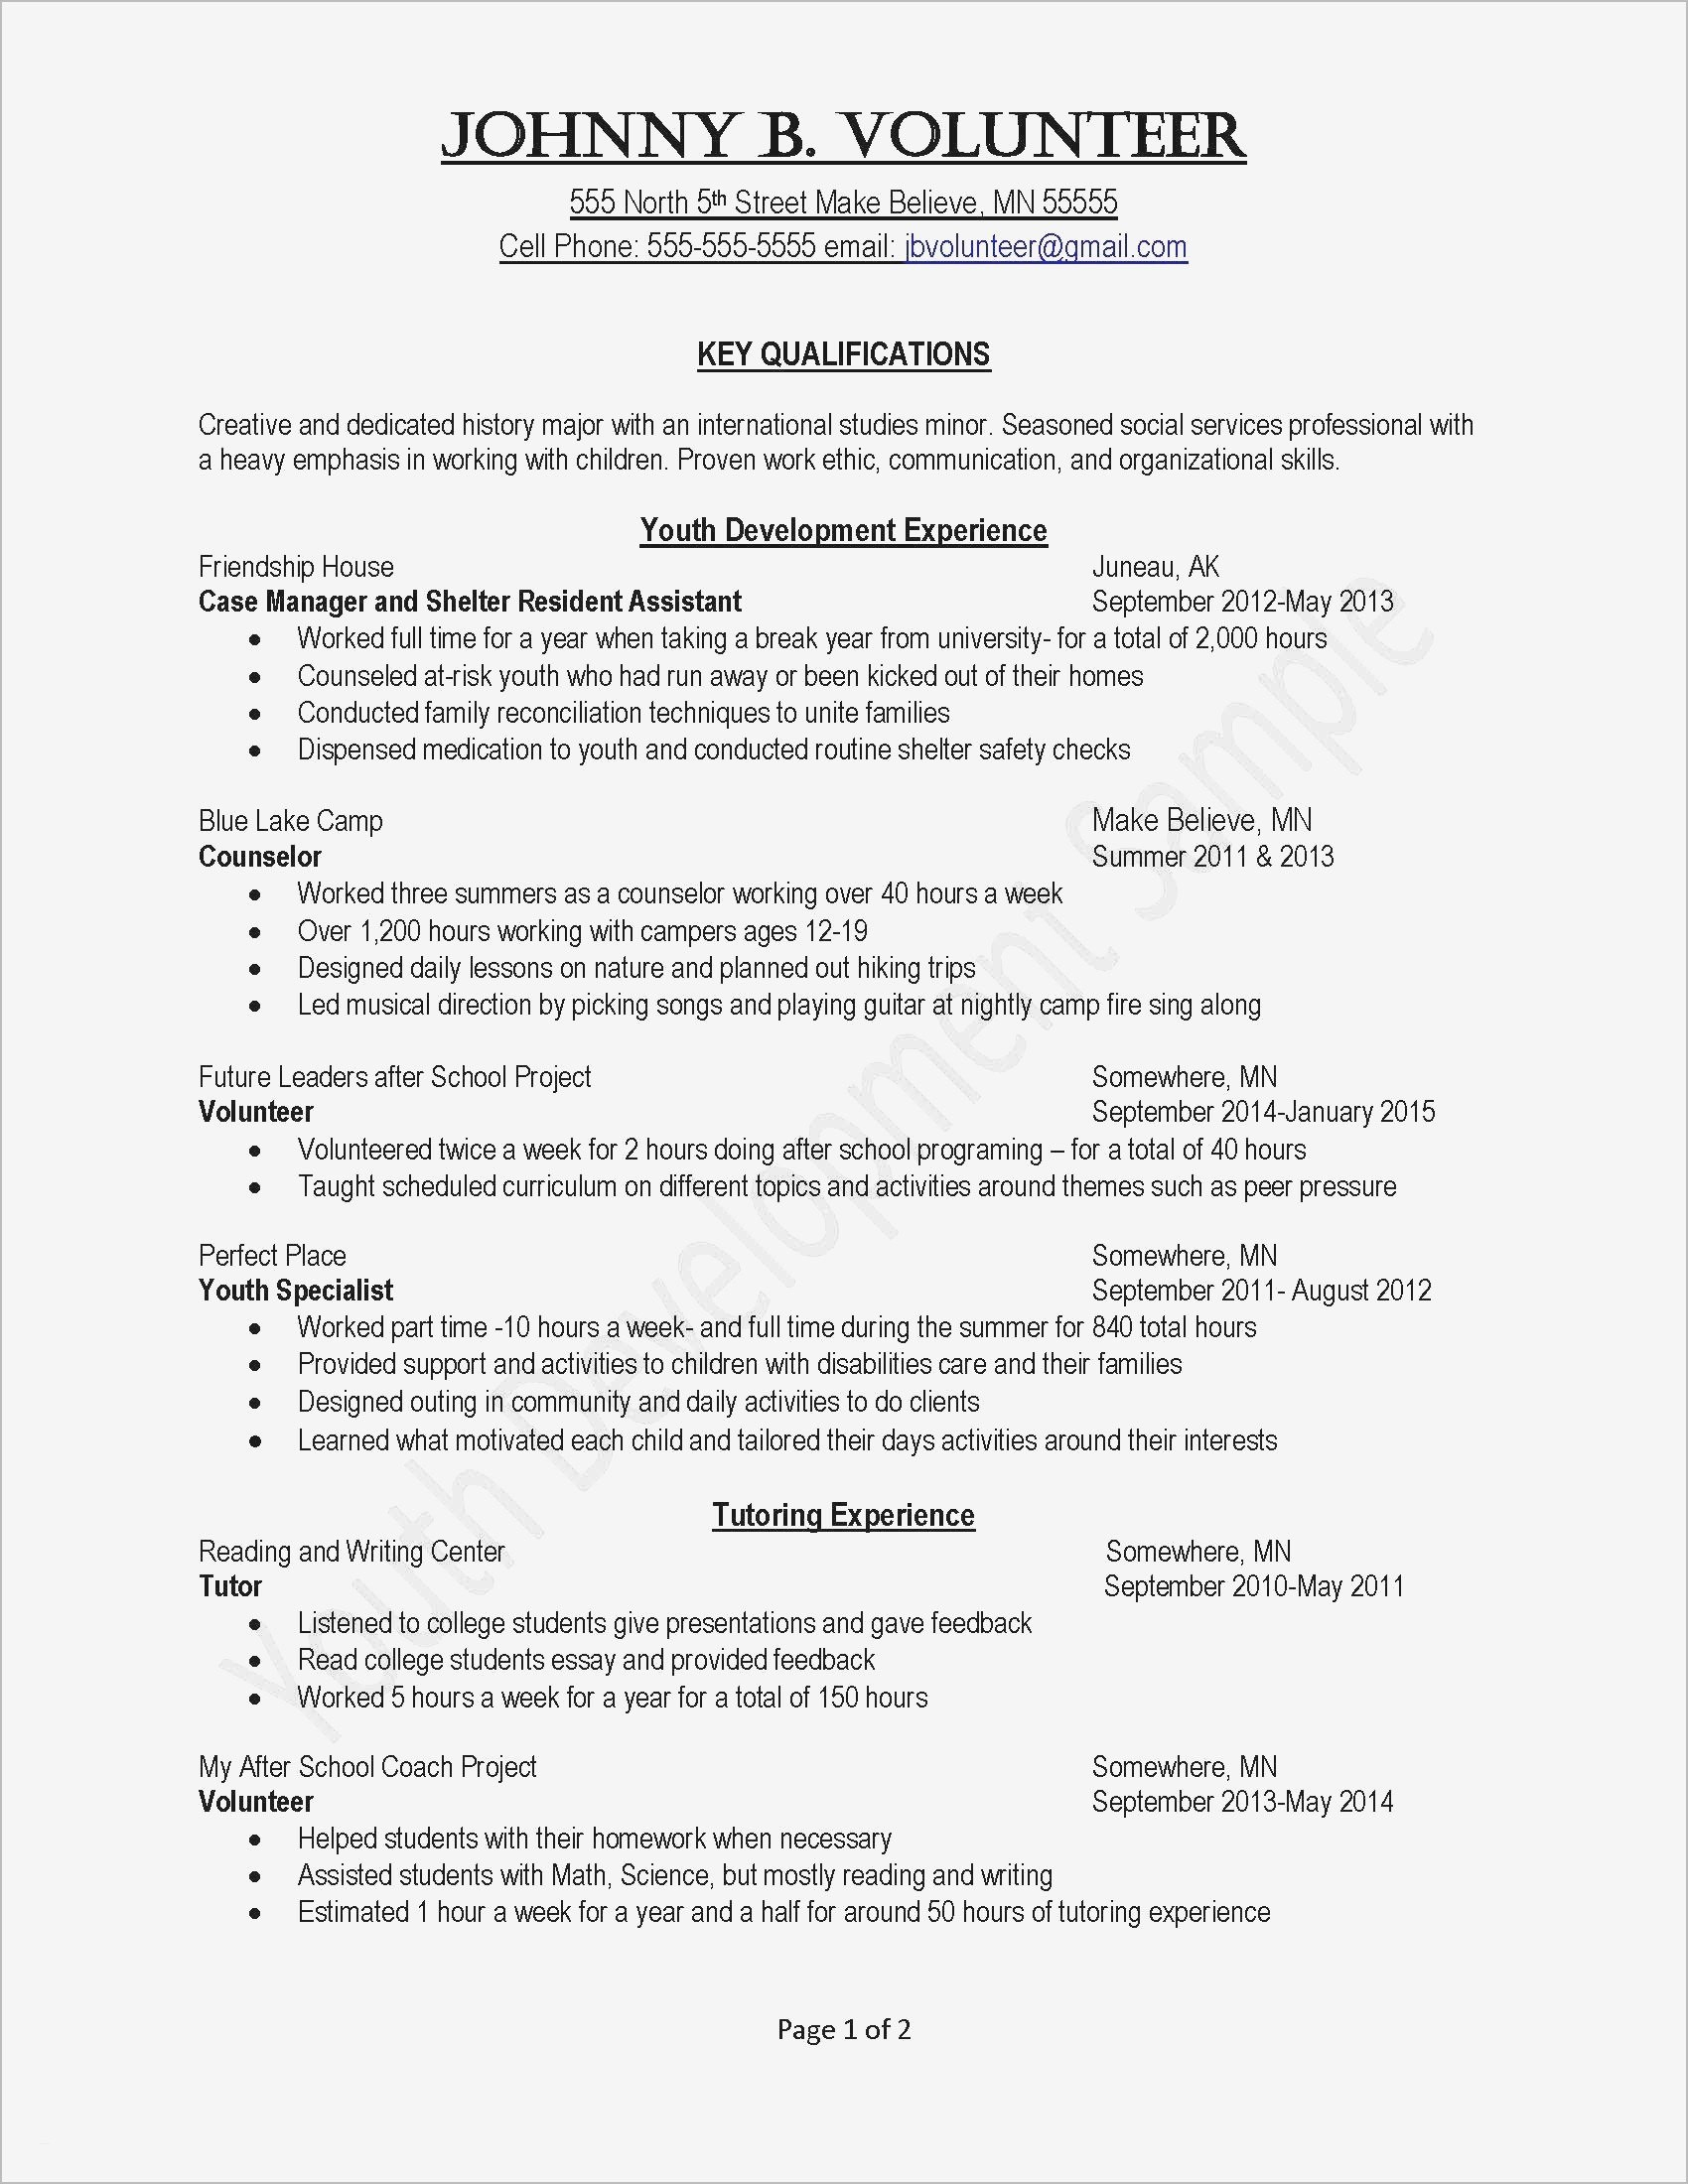 Personal Letter Template - Personal Resume Template Free Awesome Job Fer Letter Template Us